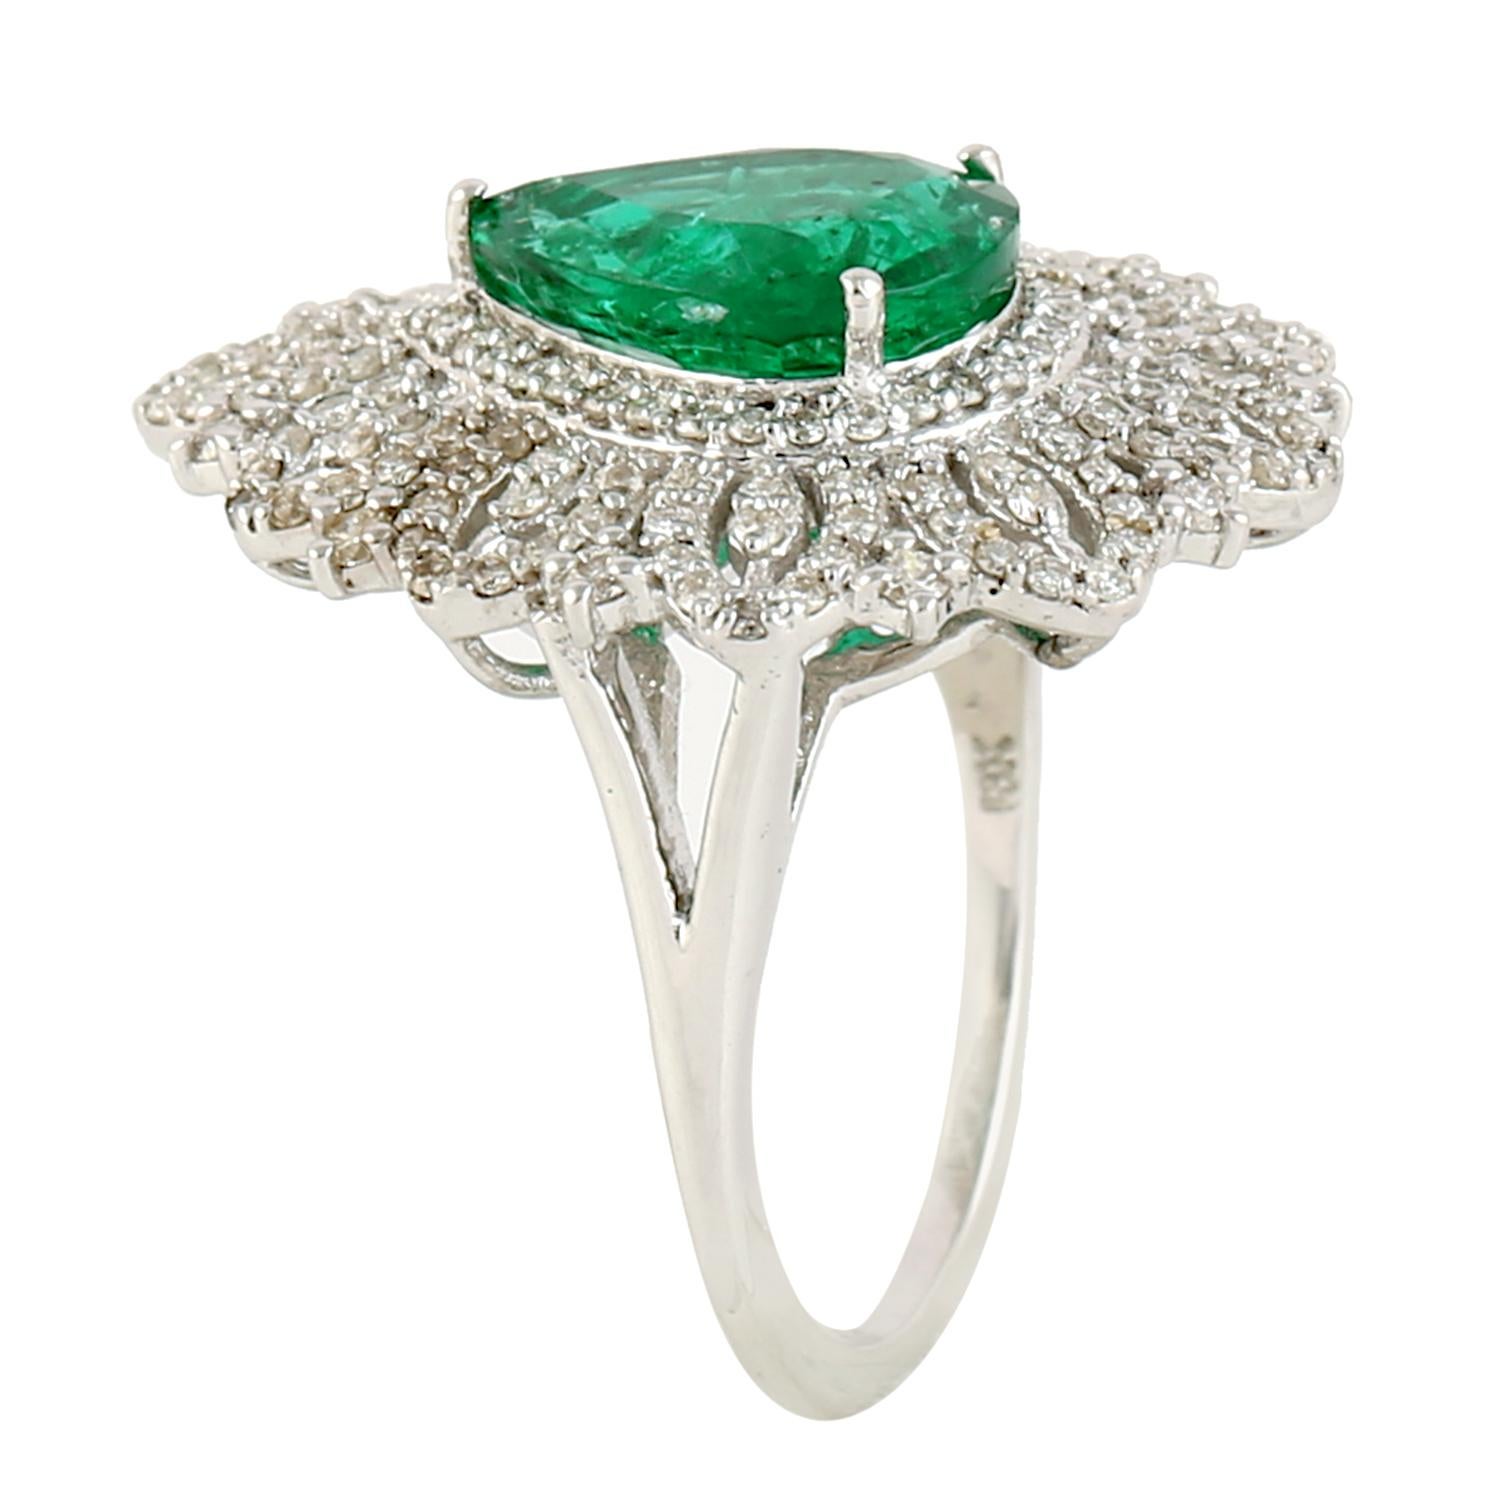 Contemporary 2.98 ct Pear Shaped Zambian Emerald Ring With Diamonds Made in 18k White Gold For Sale